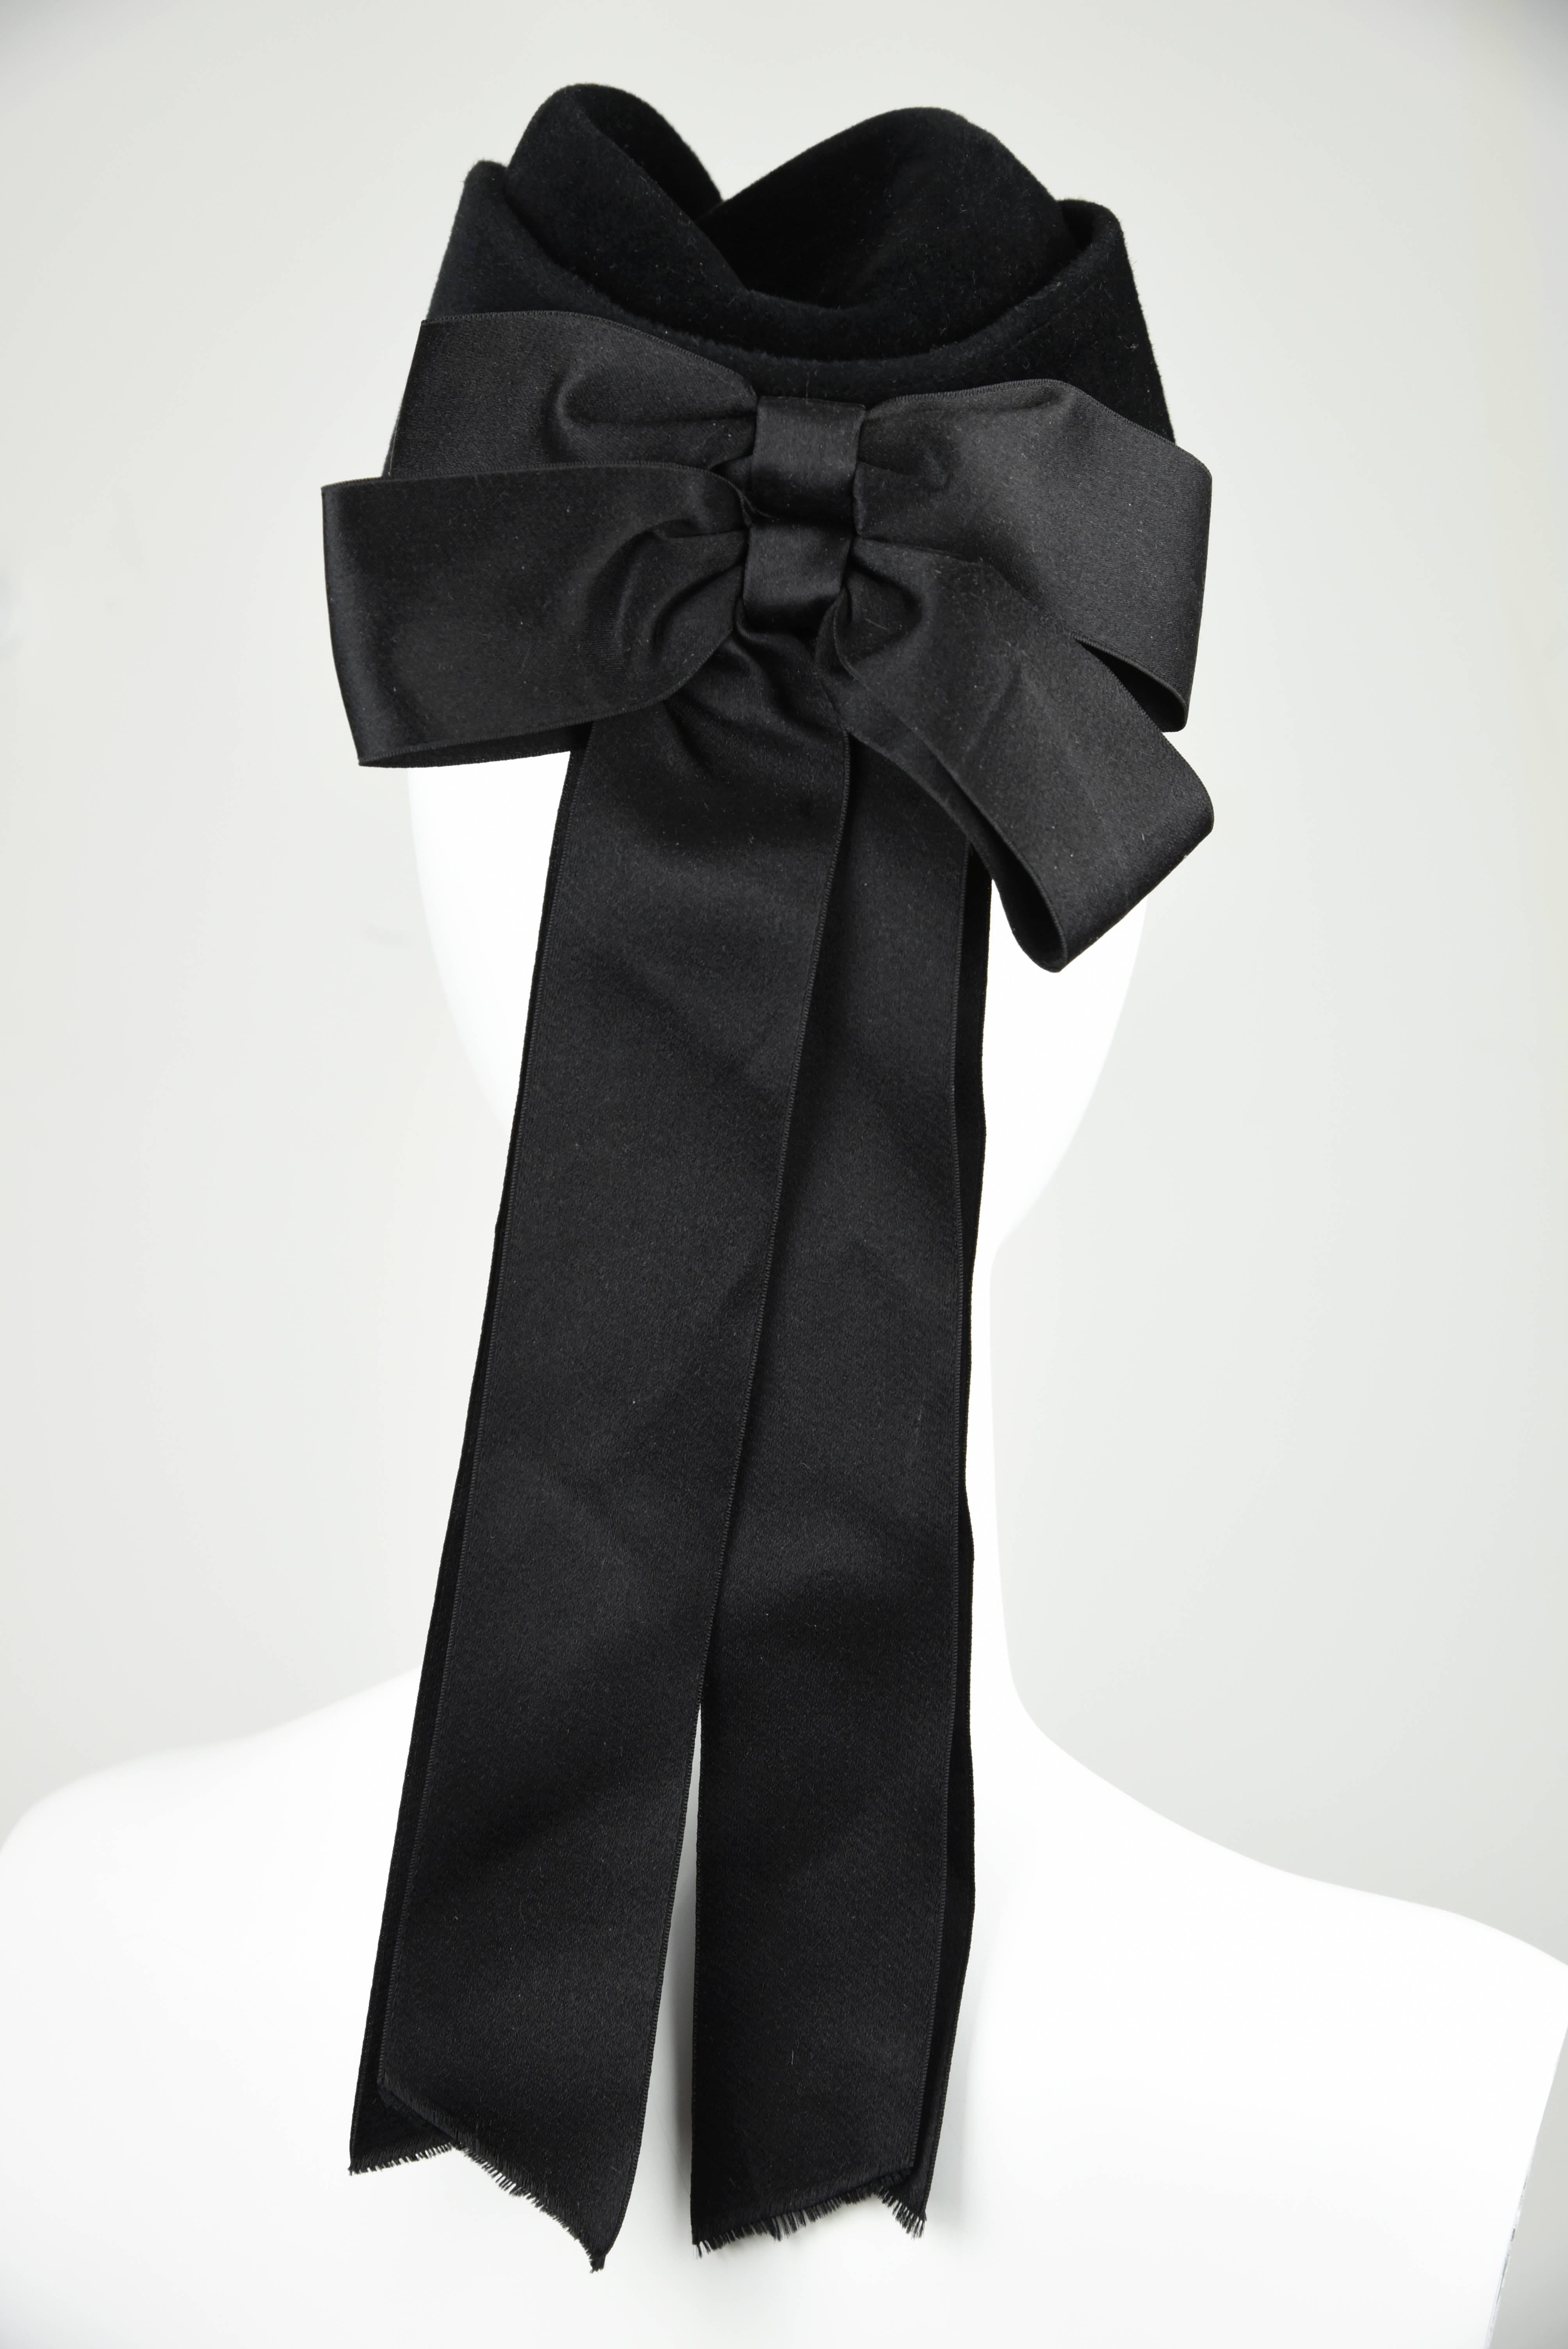 1988A Black Felt Hat With Double Black Satin Bow and Ribbons, Size 58 For Sale 2